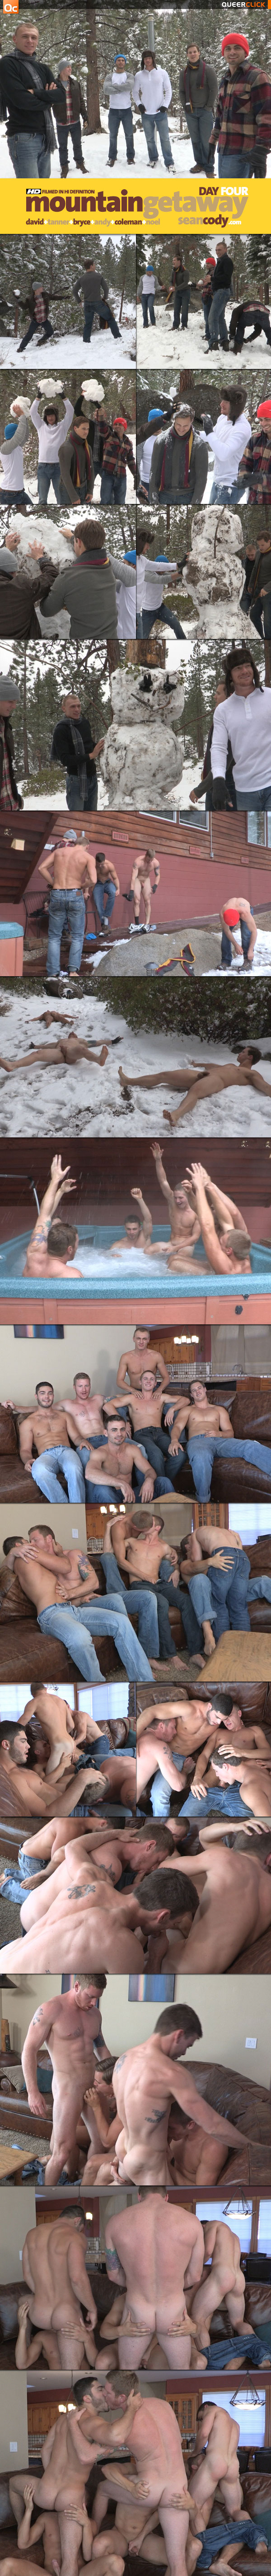 Sean Cody: Mountain Getaway Day 4 with David, Tanner, Bryce, Andy, Coleman & Noel